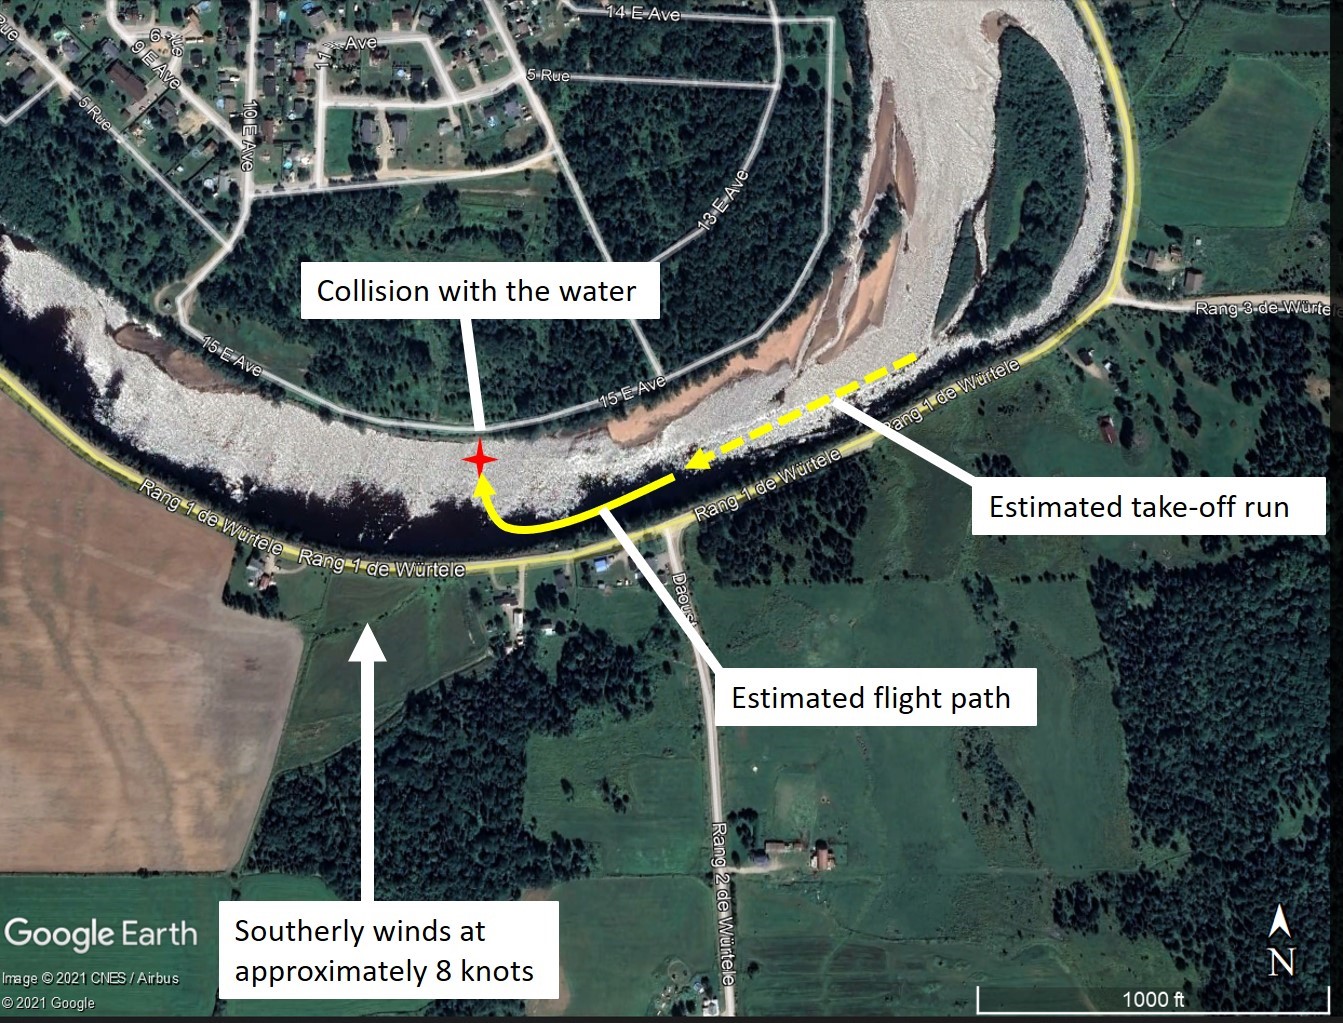 Satellite image illustrating the occurrence aircraft’s estimated take-off run and flight path, as well as the winds and the site of the collision with the water (Source: Google Earth, with TSB annotations)